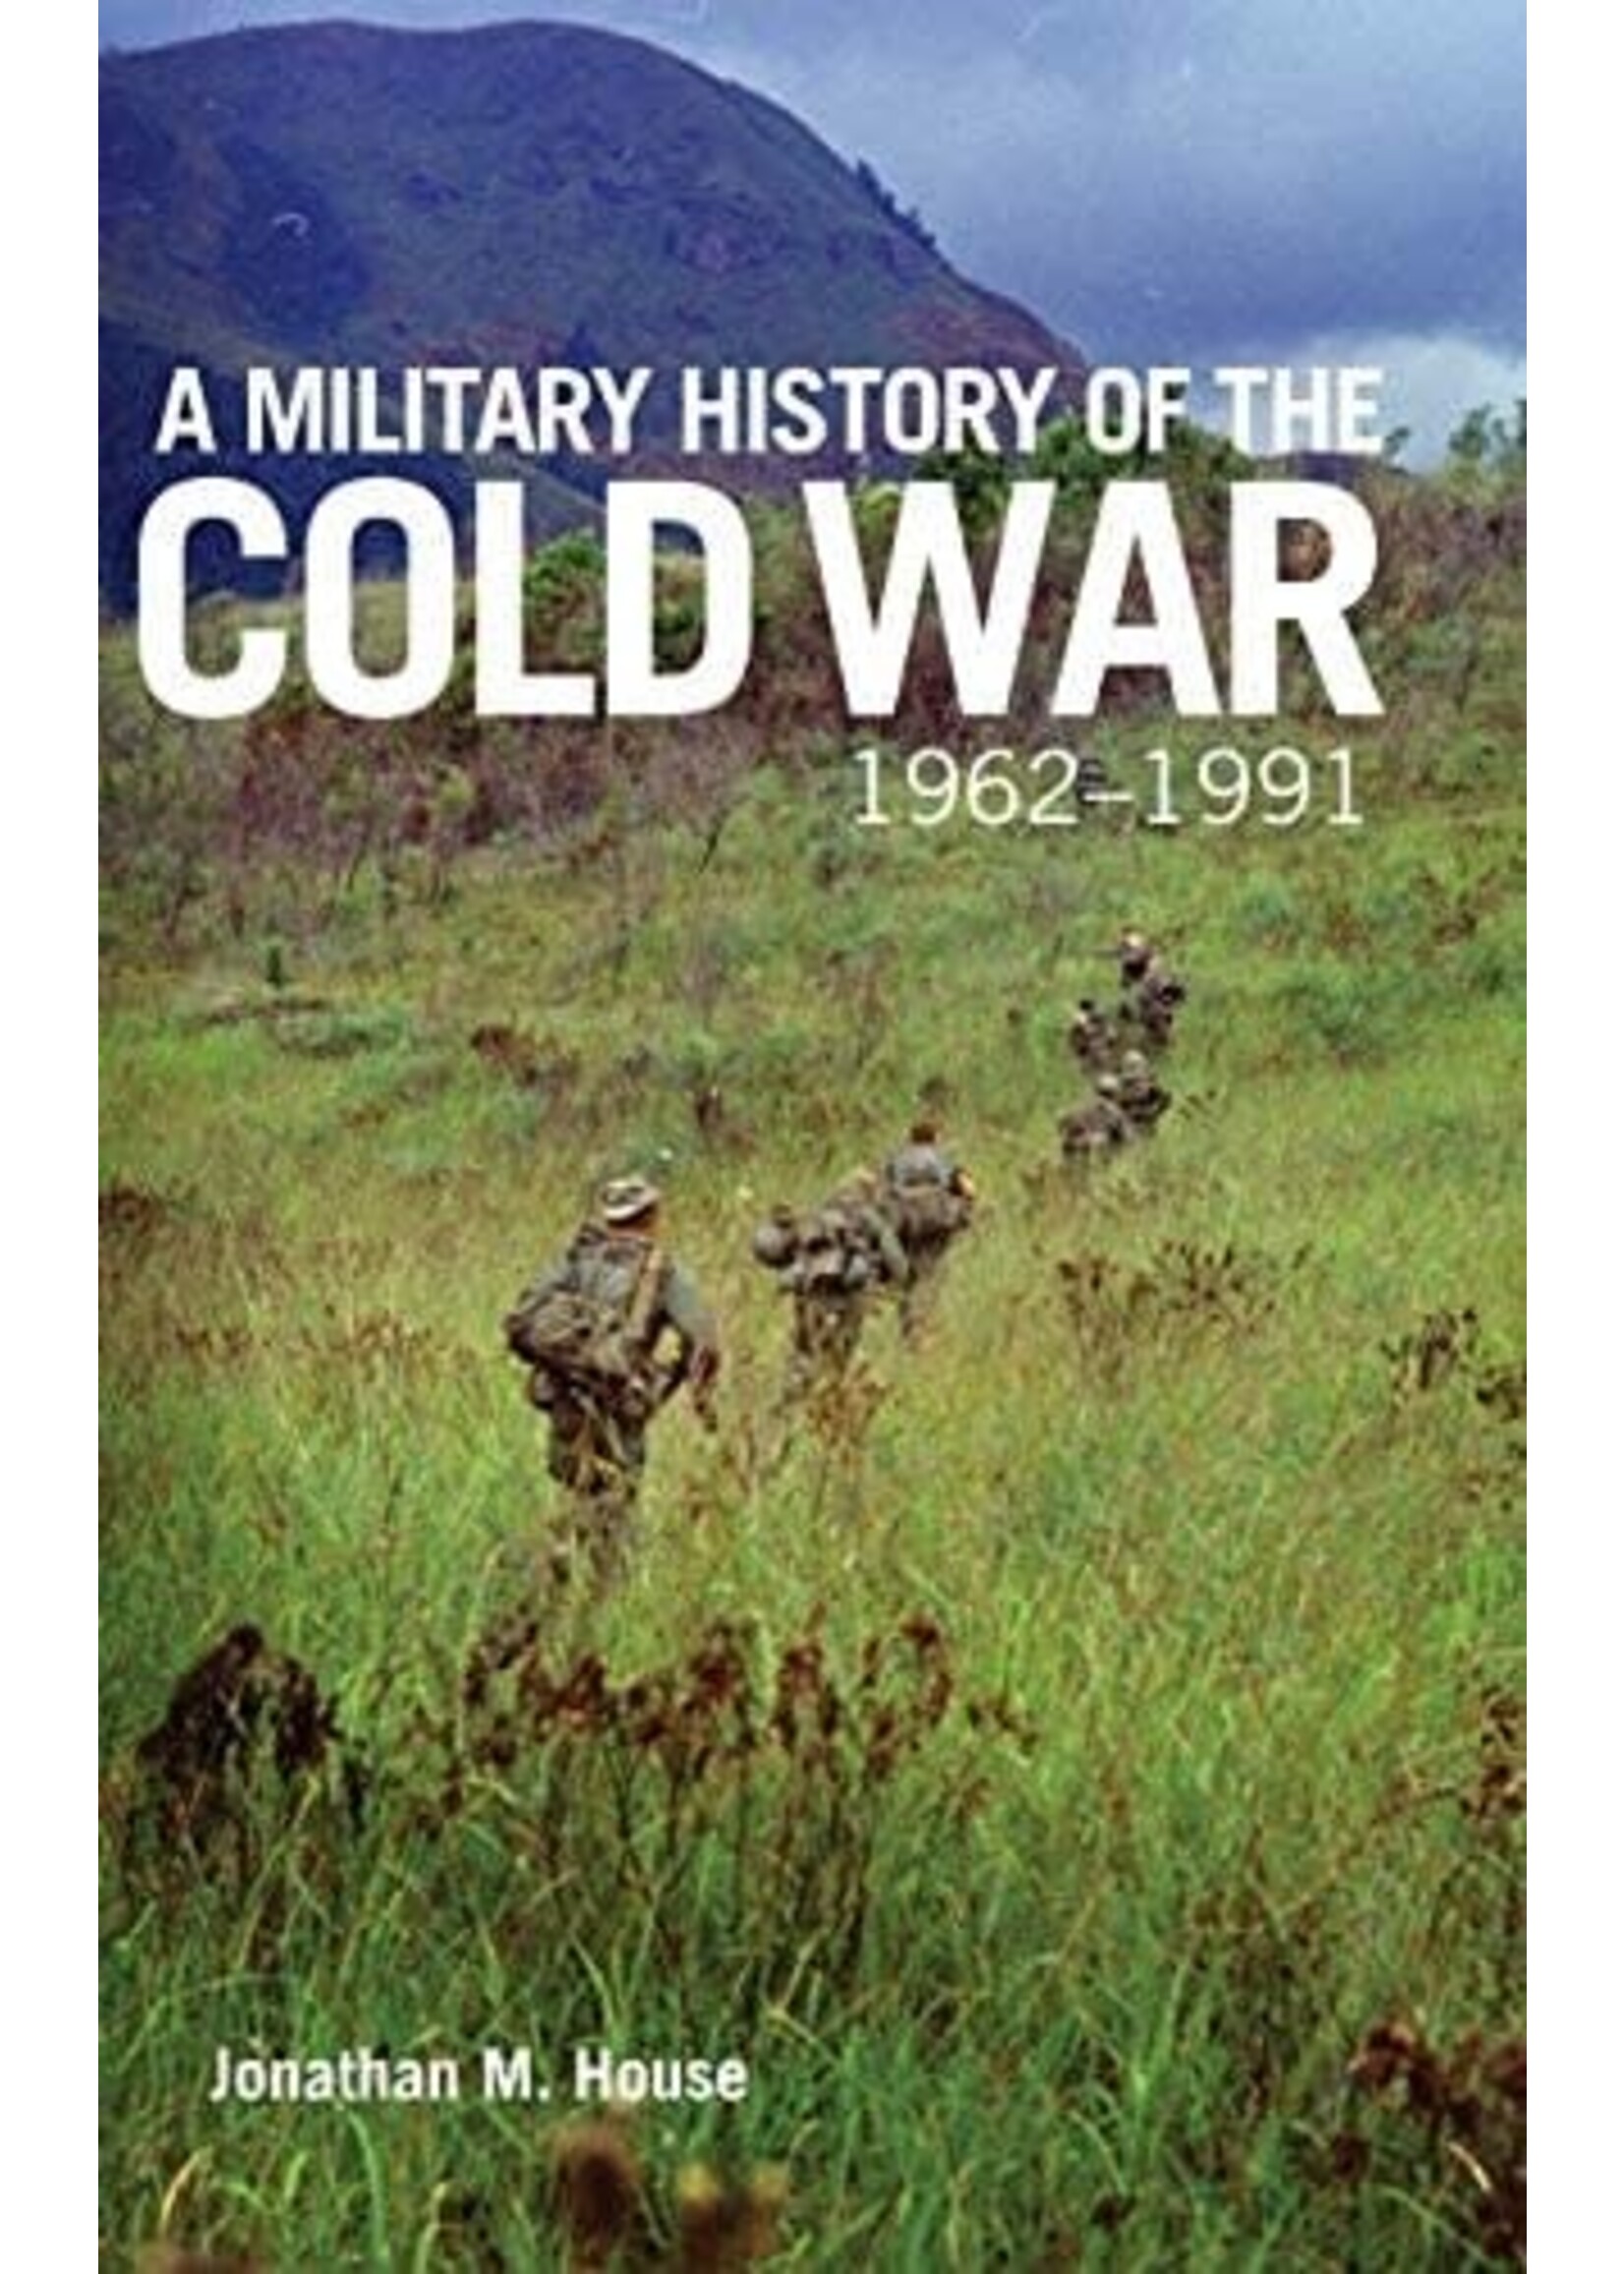 A Military History of the Cold War, 1962-1991 Hardcover